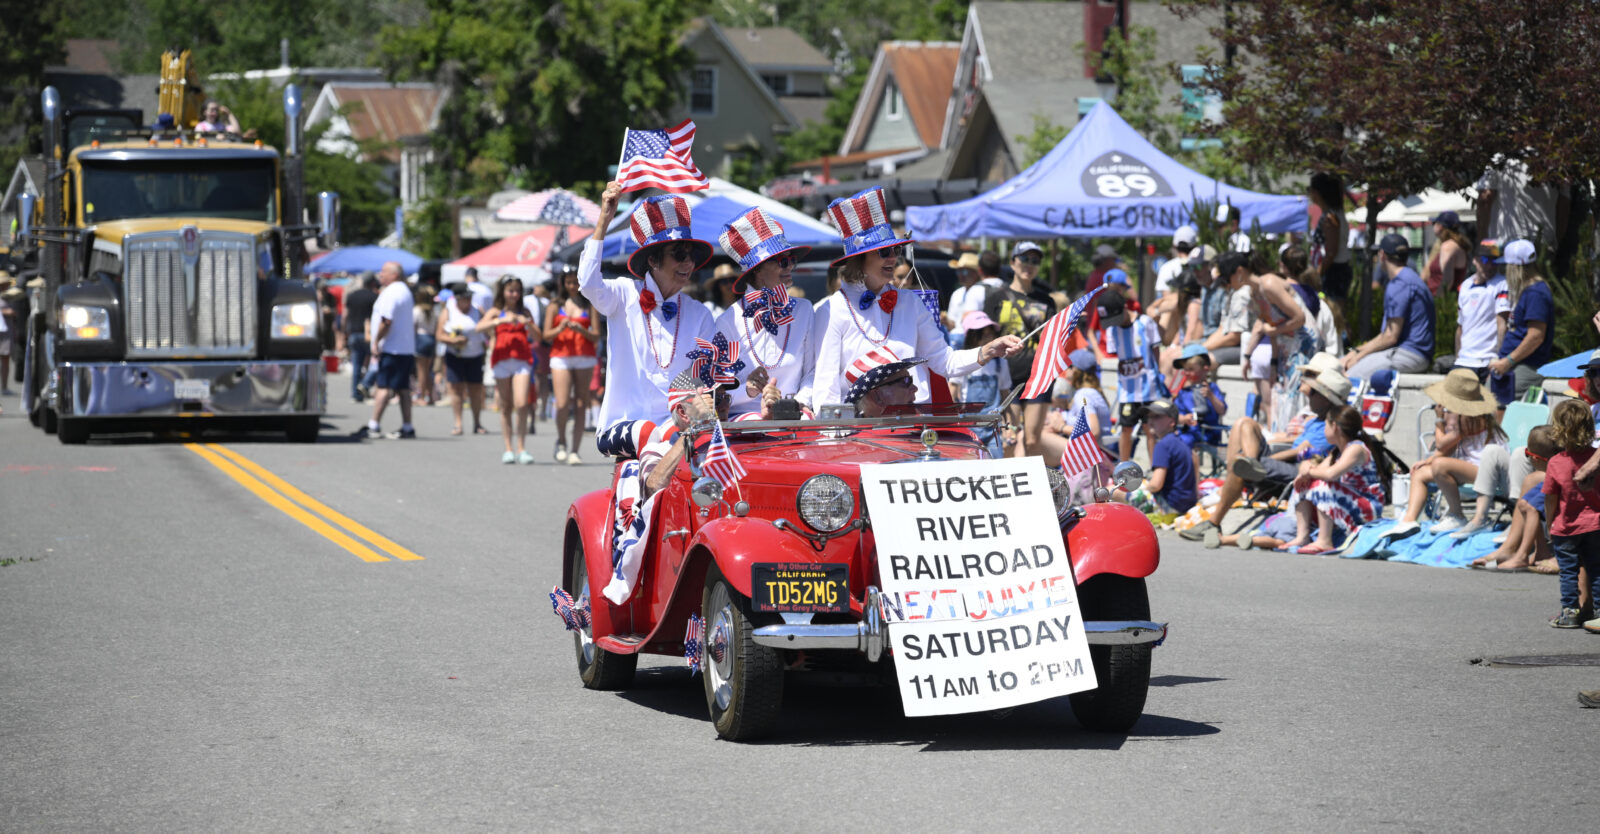 Truckee's Annual 4th of July Parade!